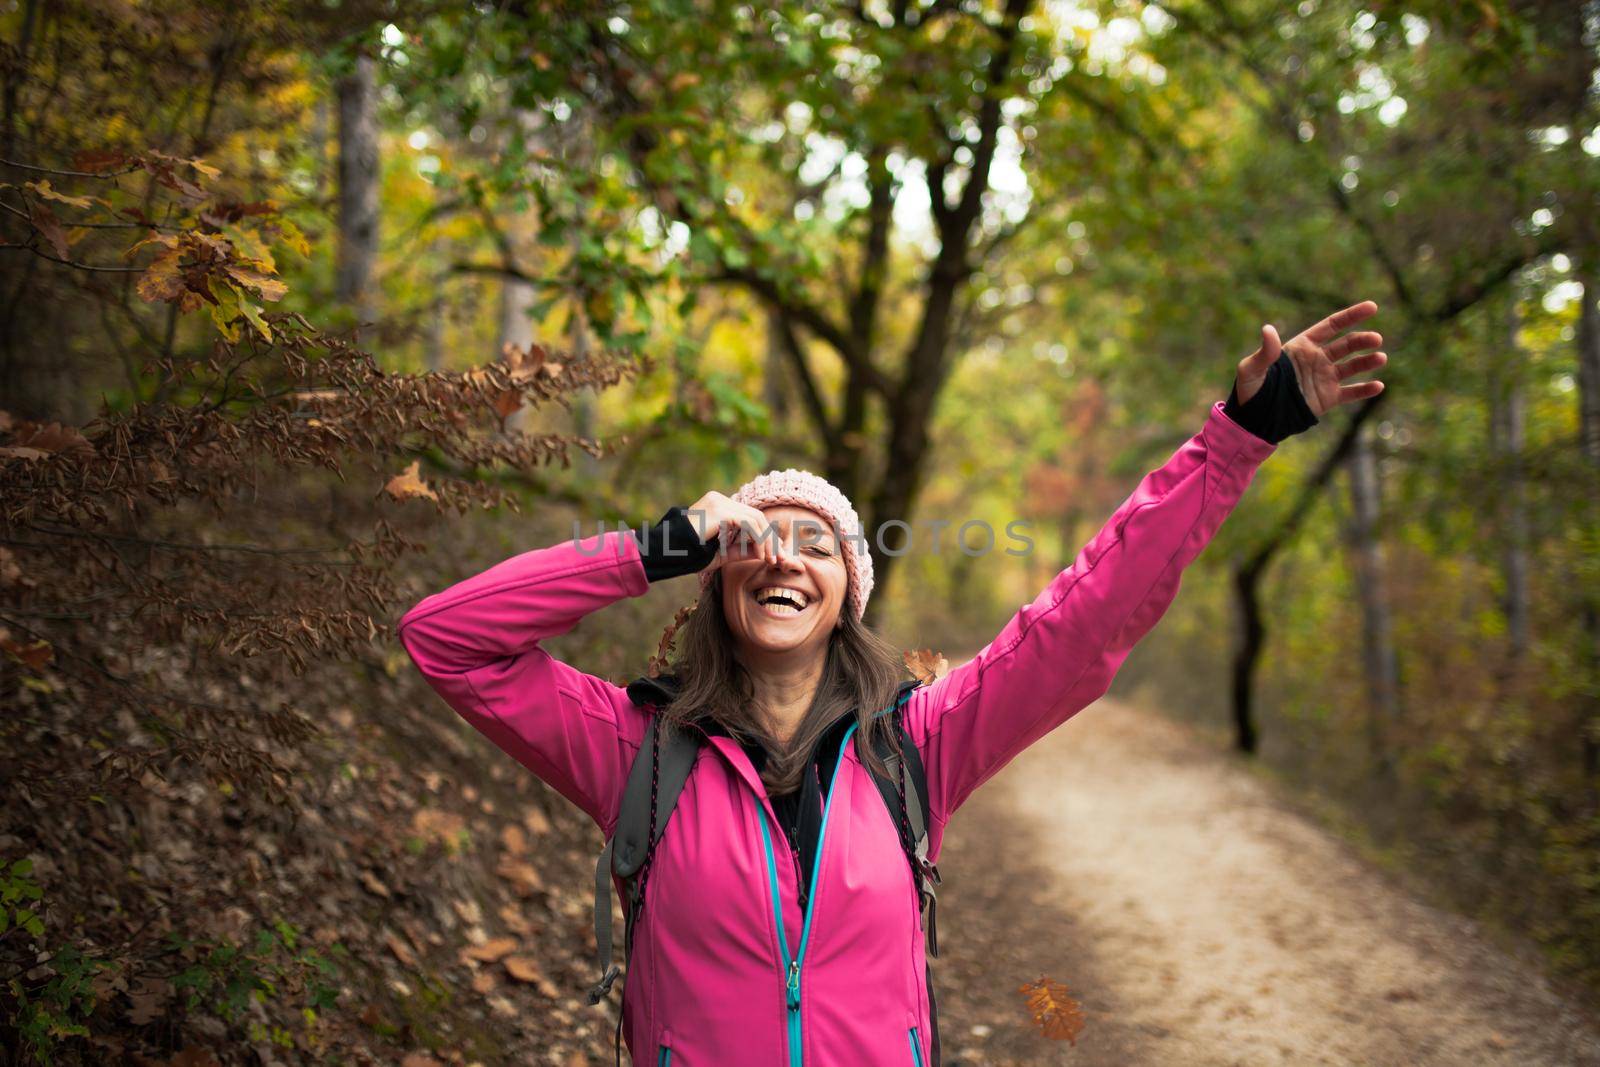 Hiking girl in pink on a trail in the forest. Hands up enjoying the falling leaves in nature in fall season.